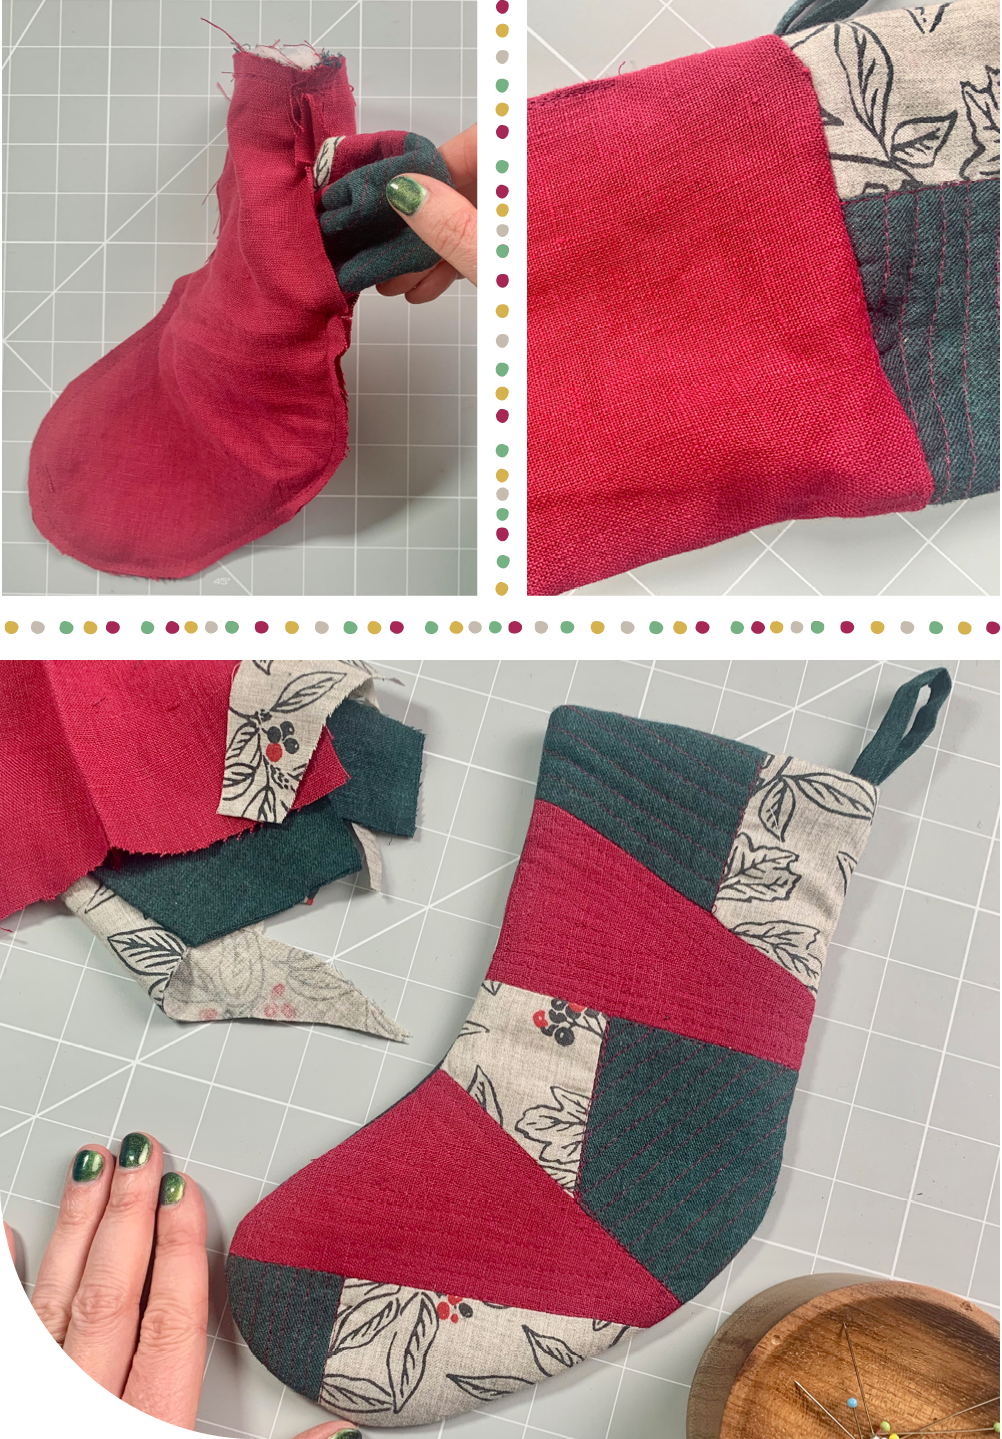 Bag out and complete your patchwork Christmas stocking